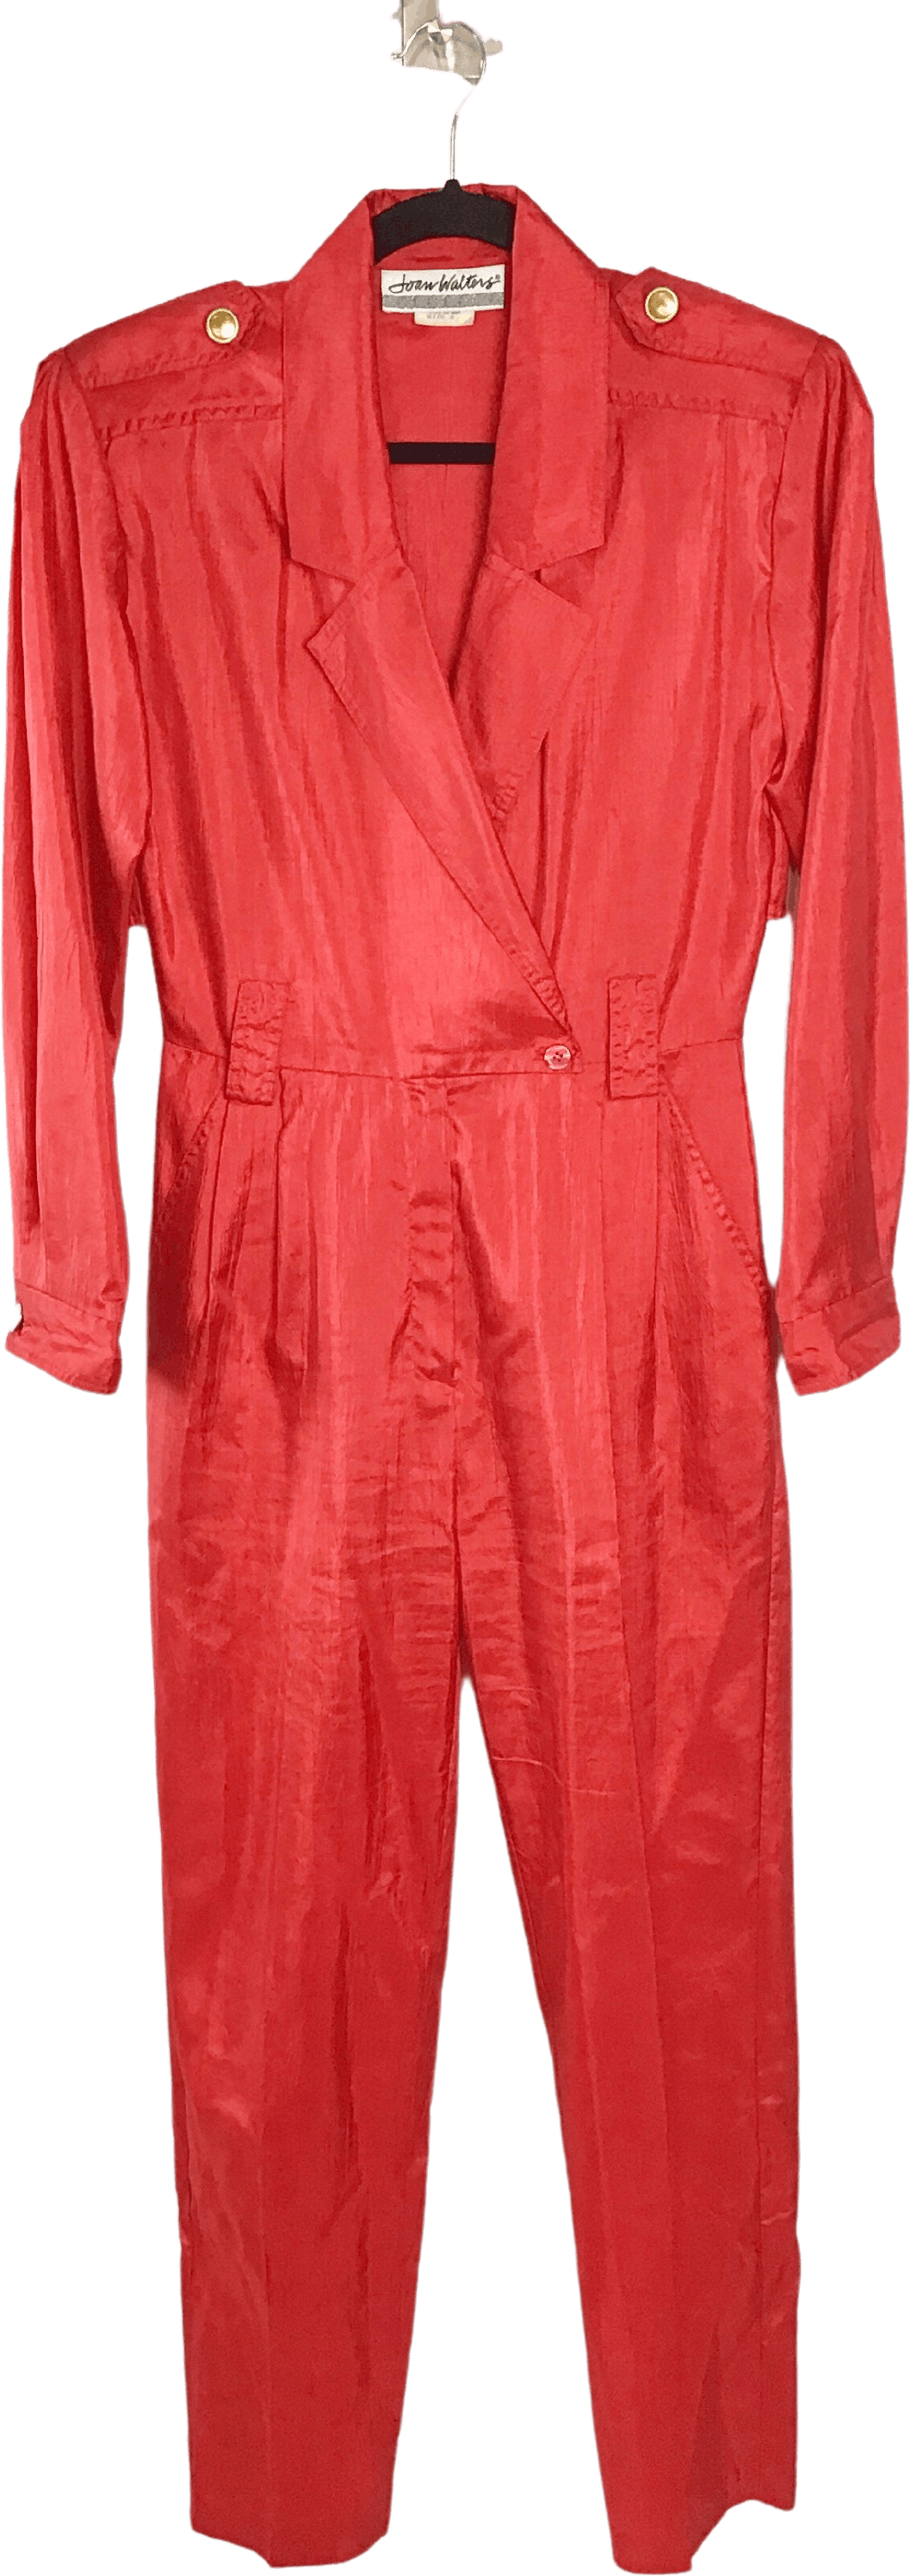 Vintage 80's Red One Piece Jumpsuit with Shoulder Pads by Joan Walters ...